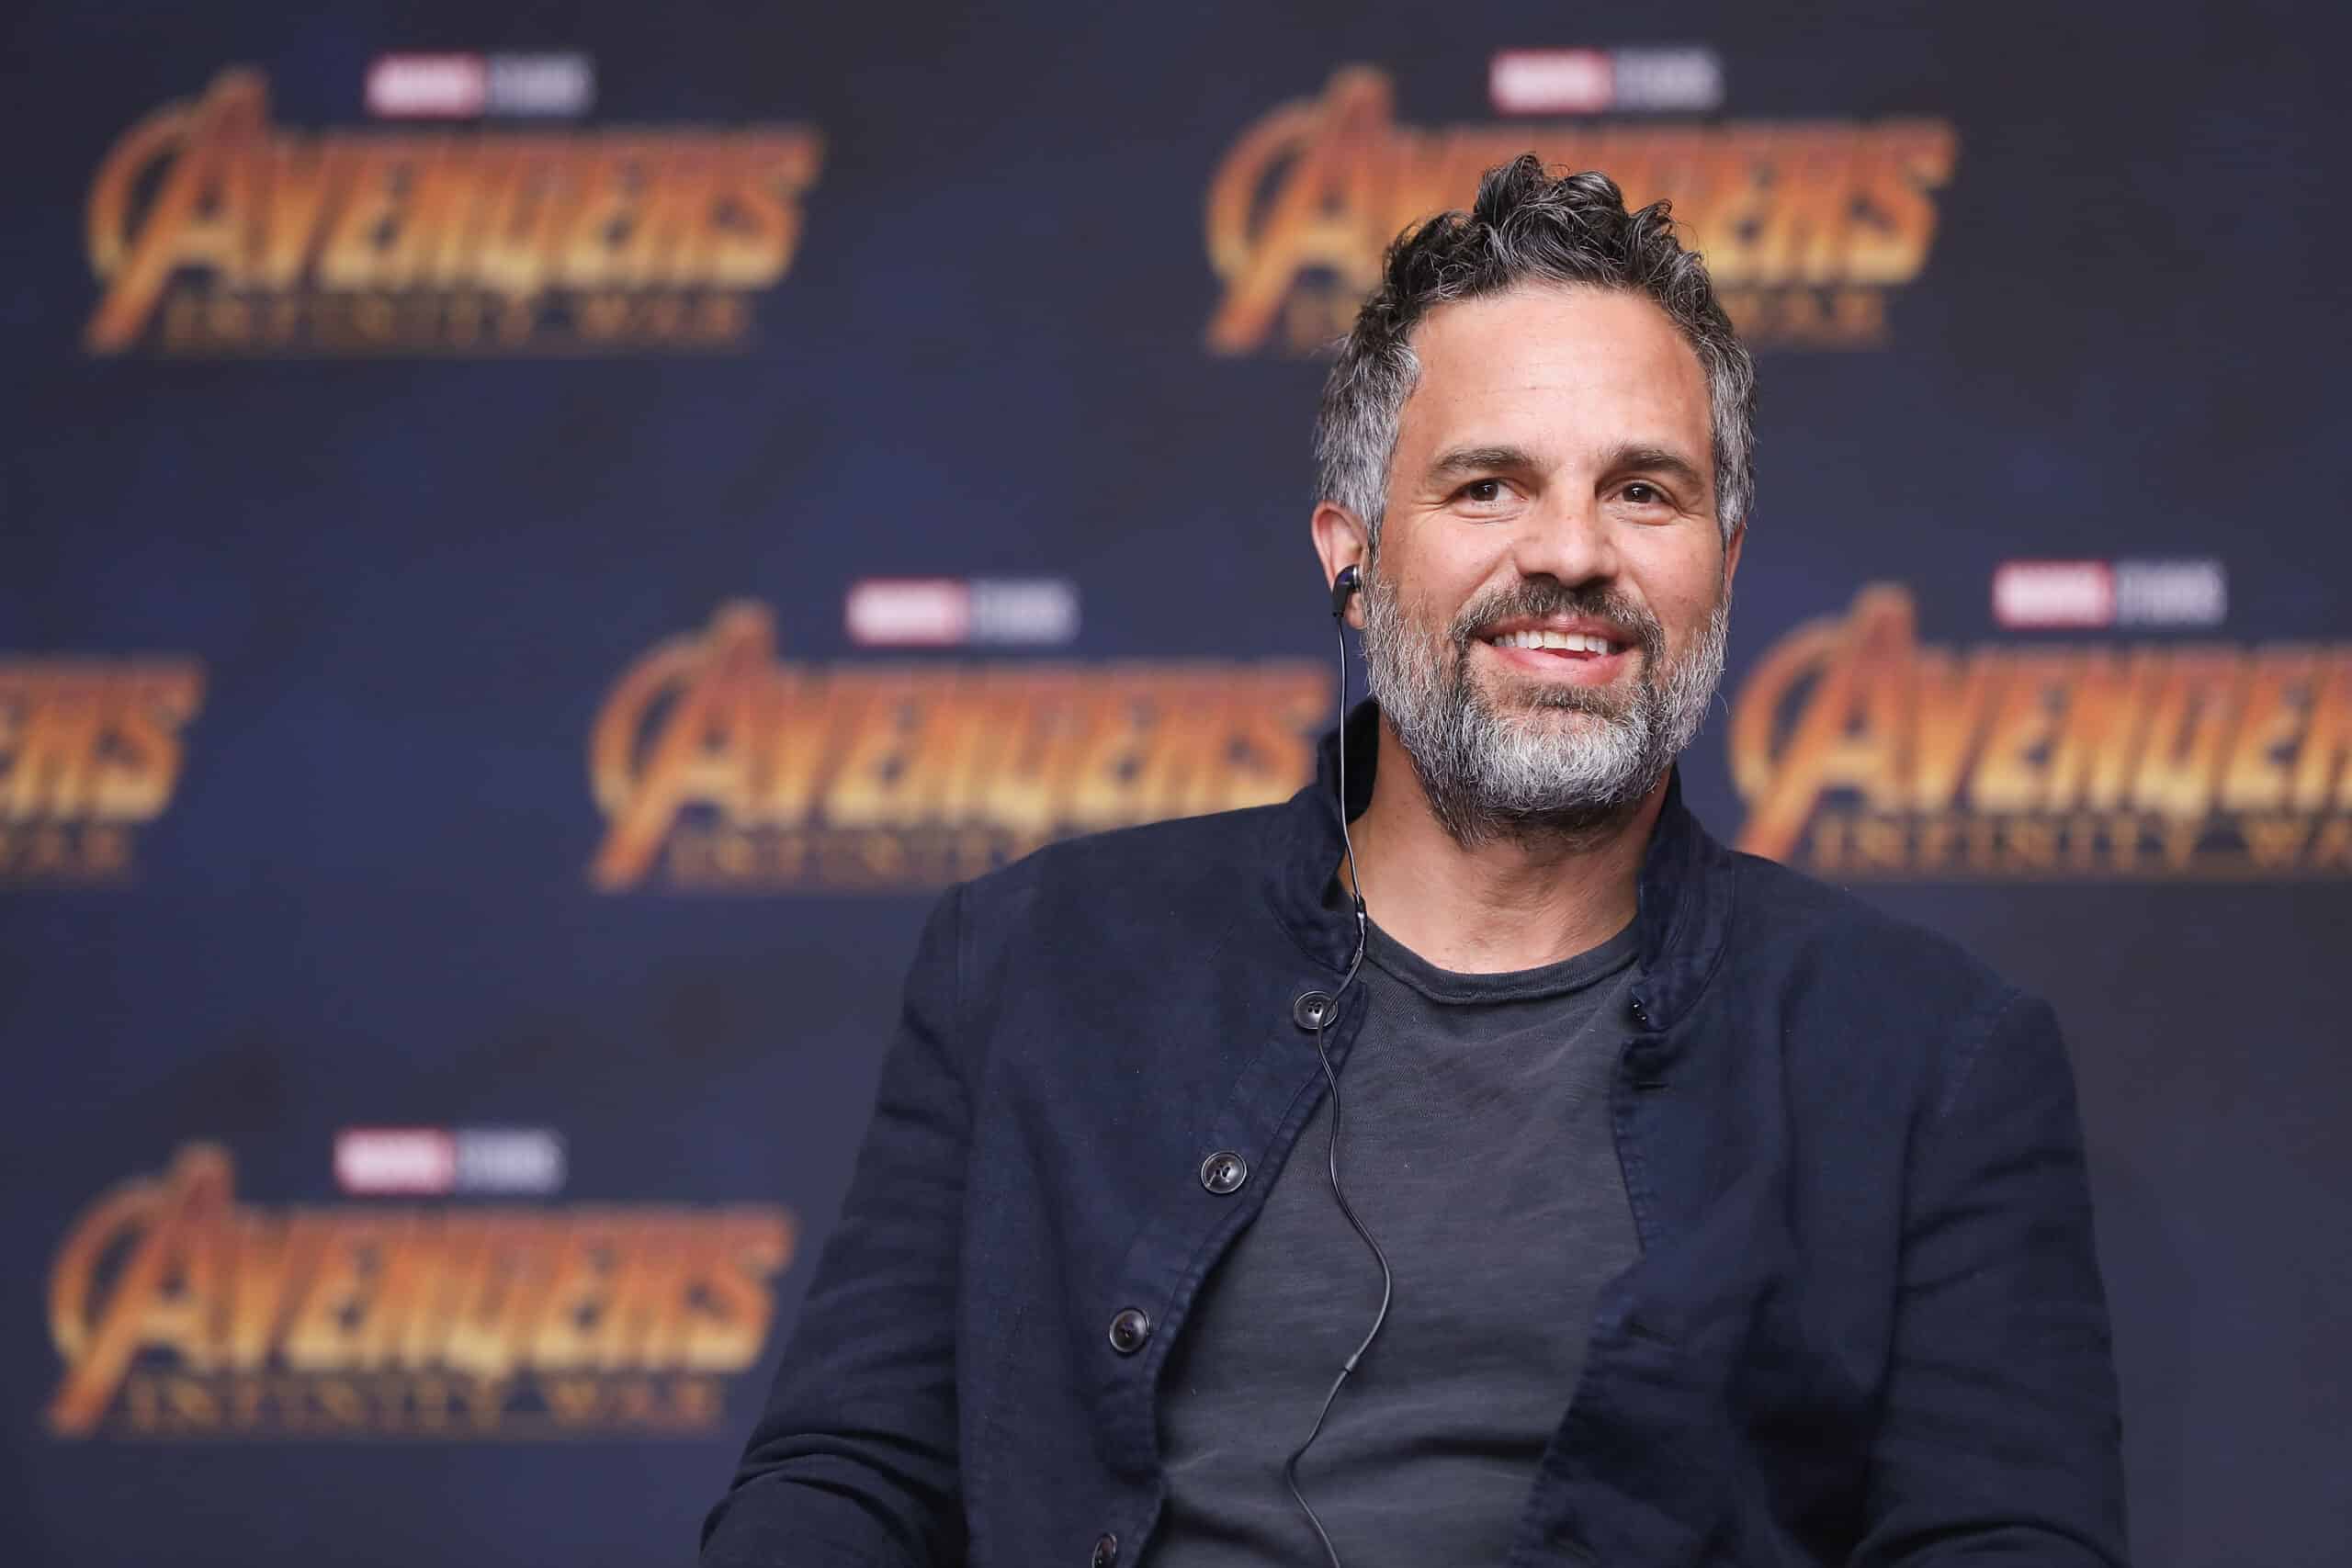 Actor Mark Ruffalo attends a press conference to promote the film "Avengers: Infinity War" at Four Seasons Hotel on April 5, 2018 in Mexico City, Mexico